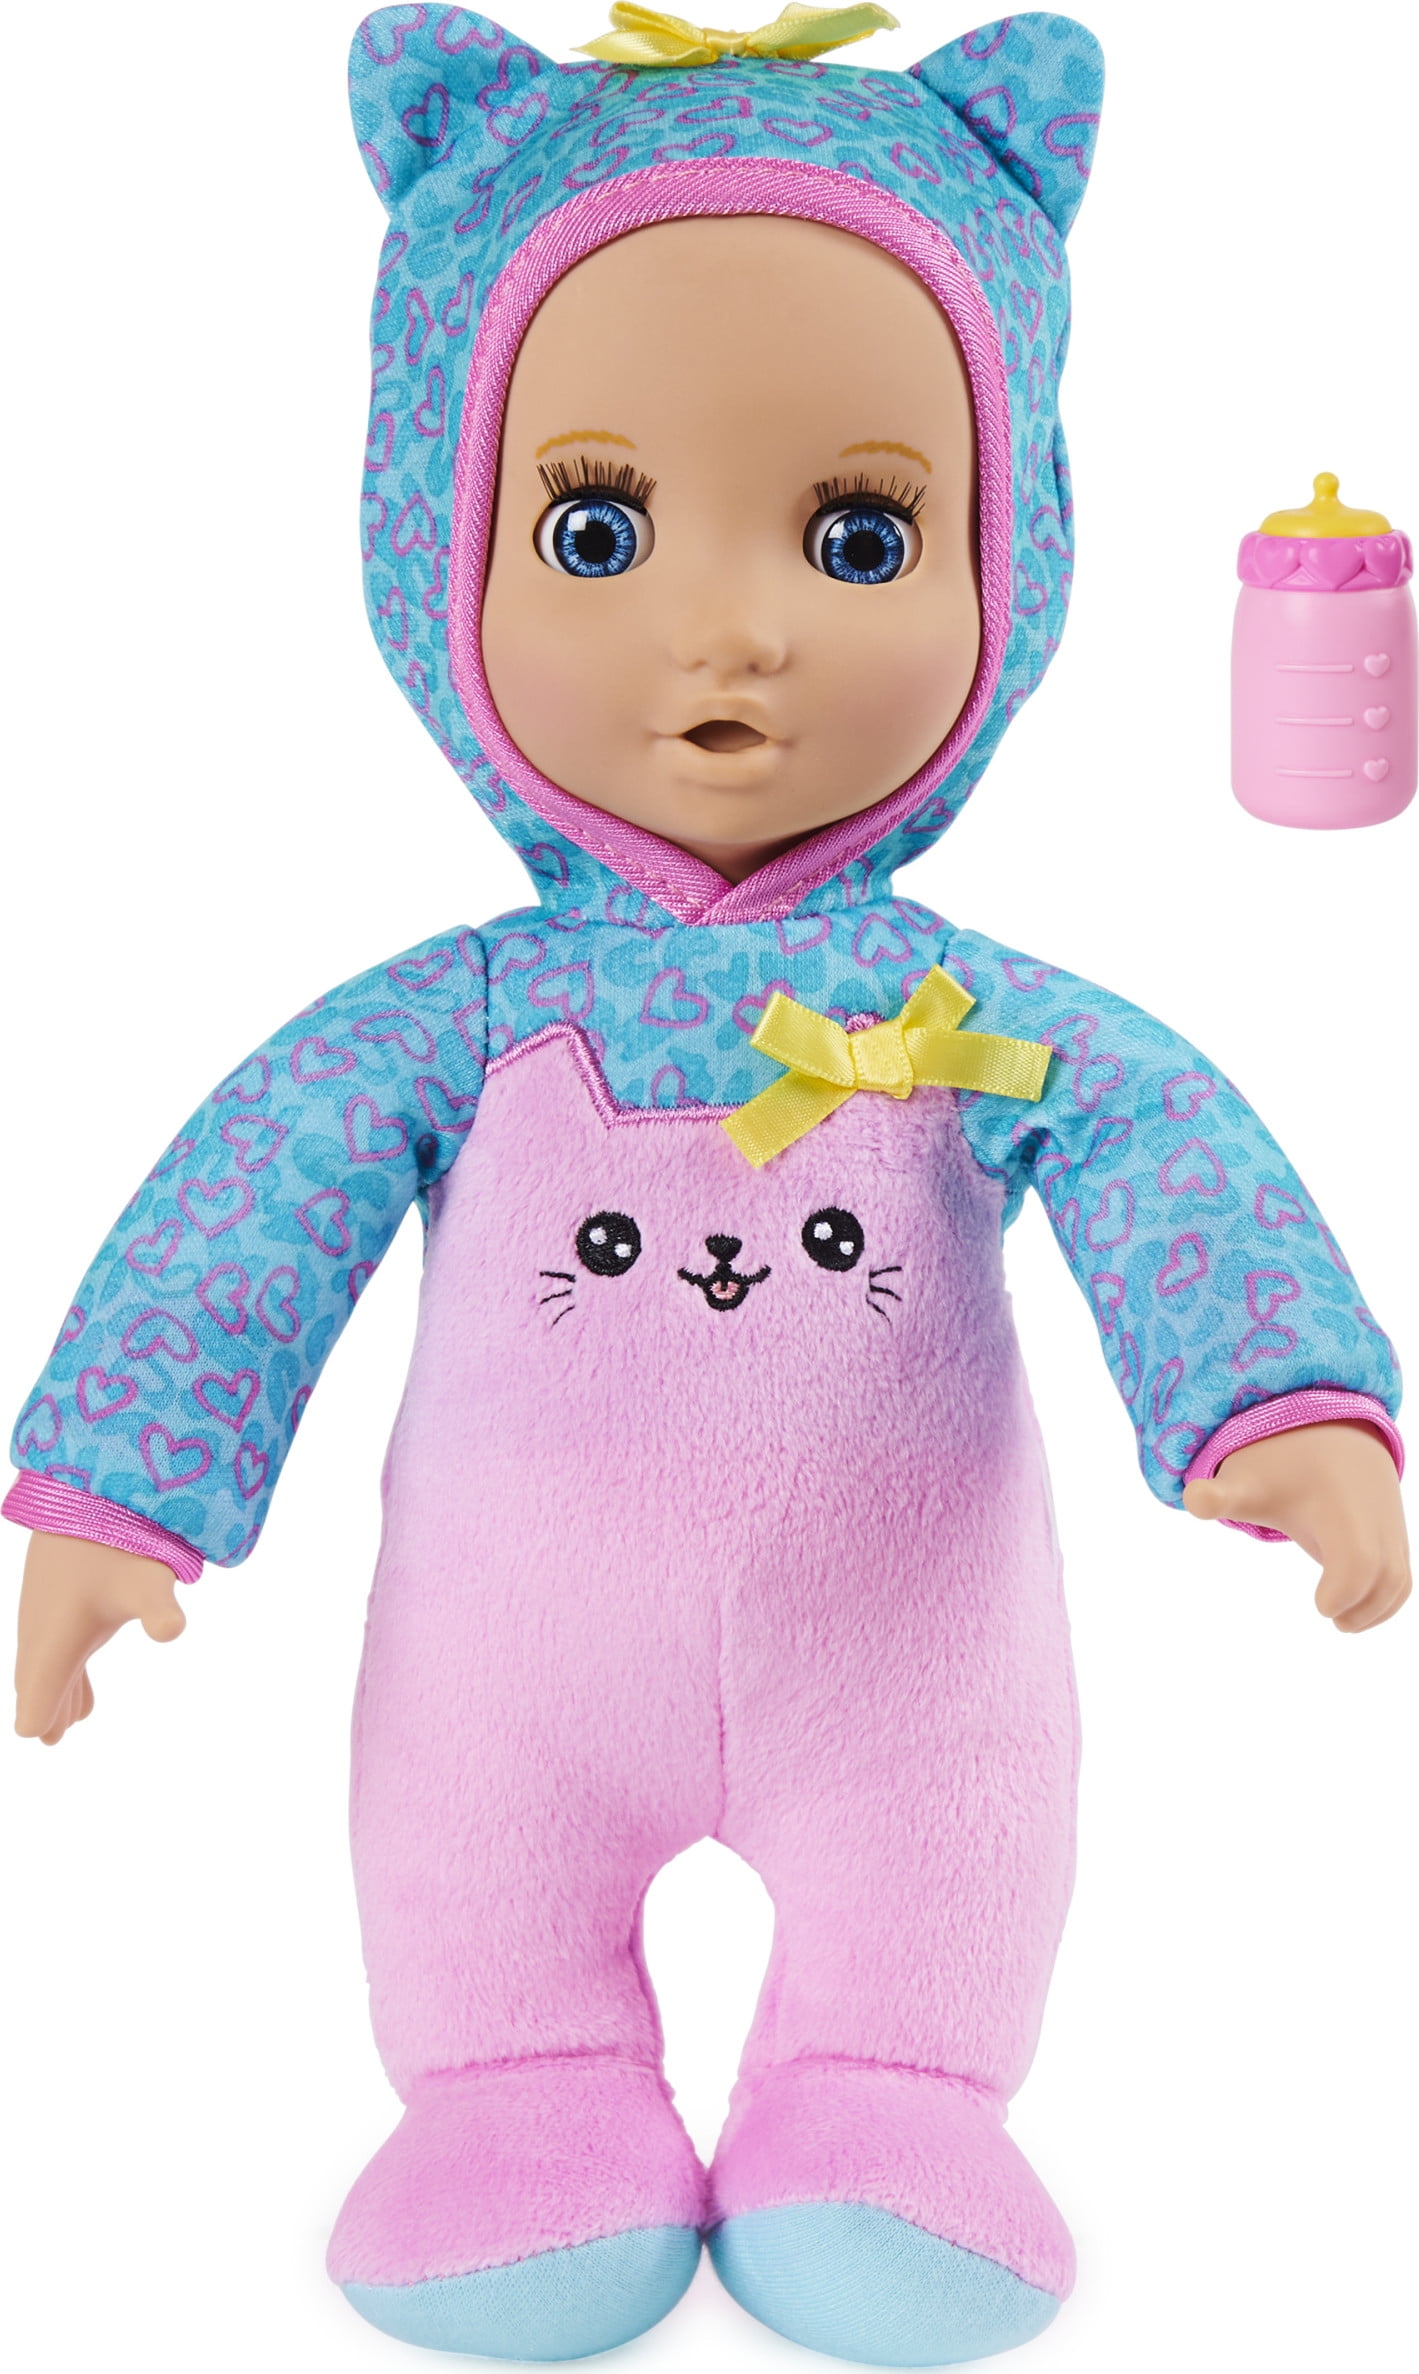 11" Luvzies by Luvabella Cuddly Baby Doll with Bottle Accessory $6.94 + Free S&H w/ Walmart+ or $35+